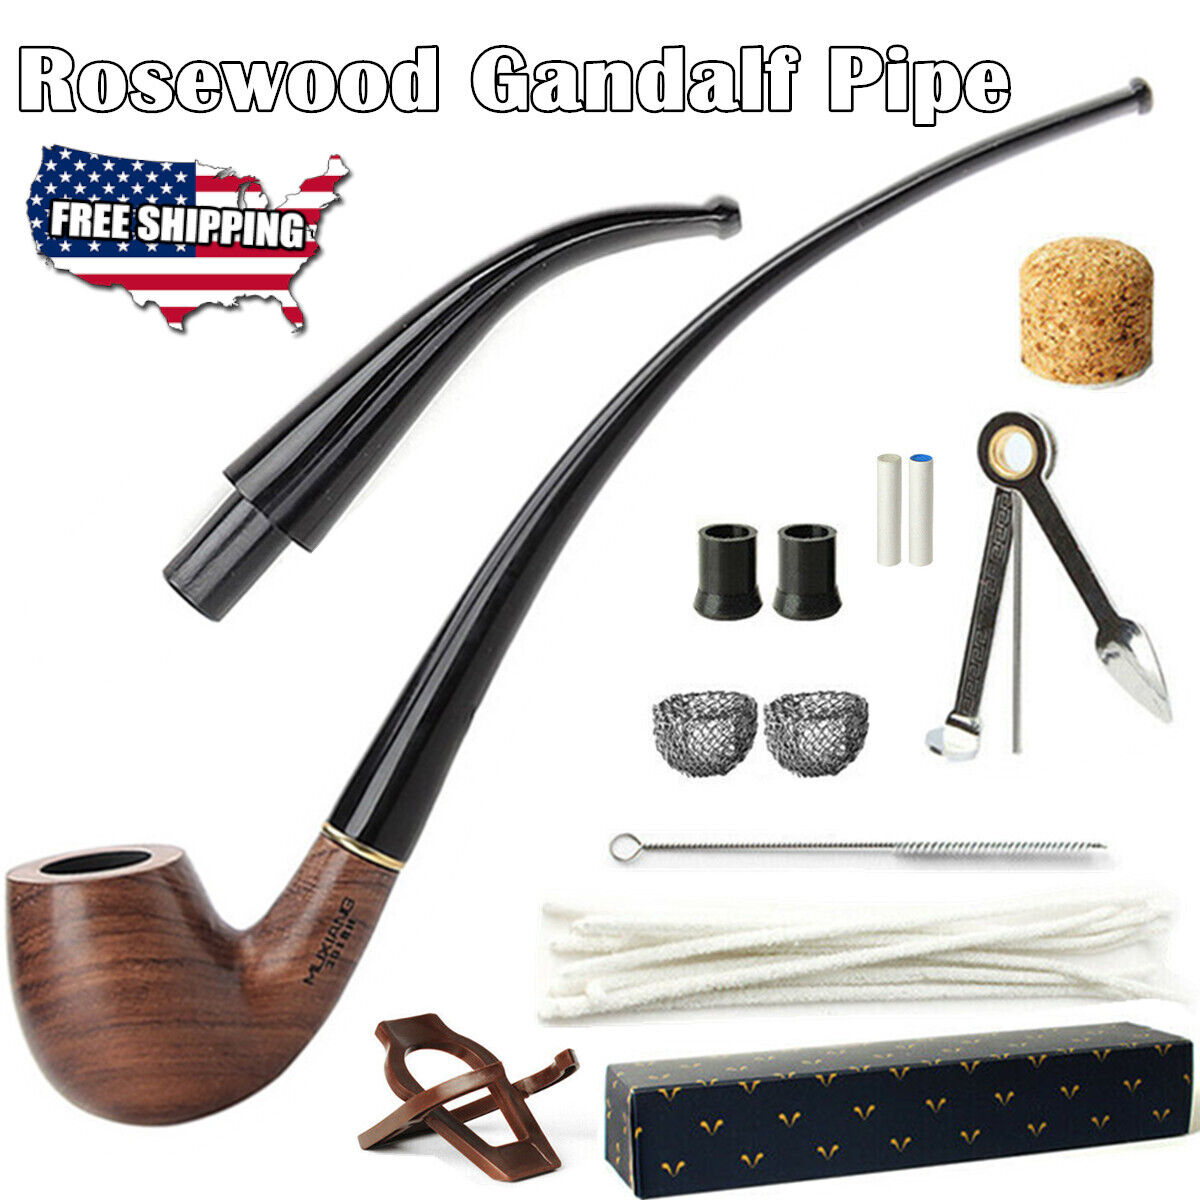 Rosewood Churchwarden Pipe Long Stem Classic Bent Tobacco Pipe With Accessories